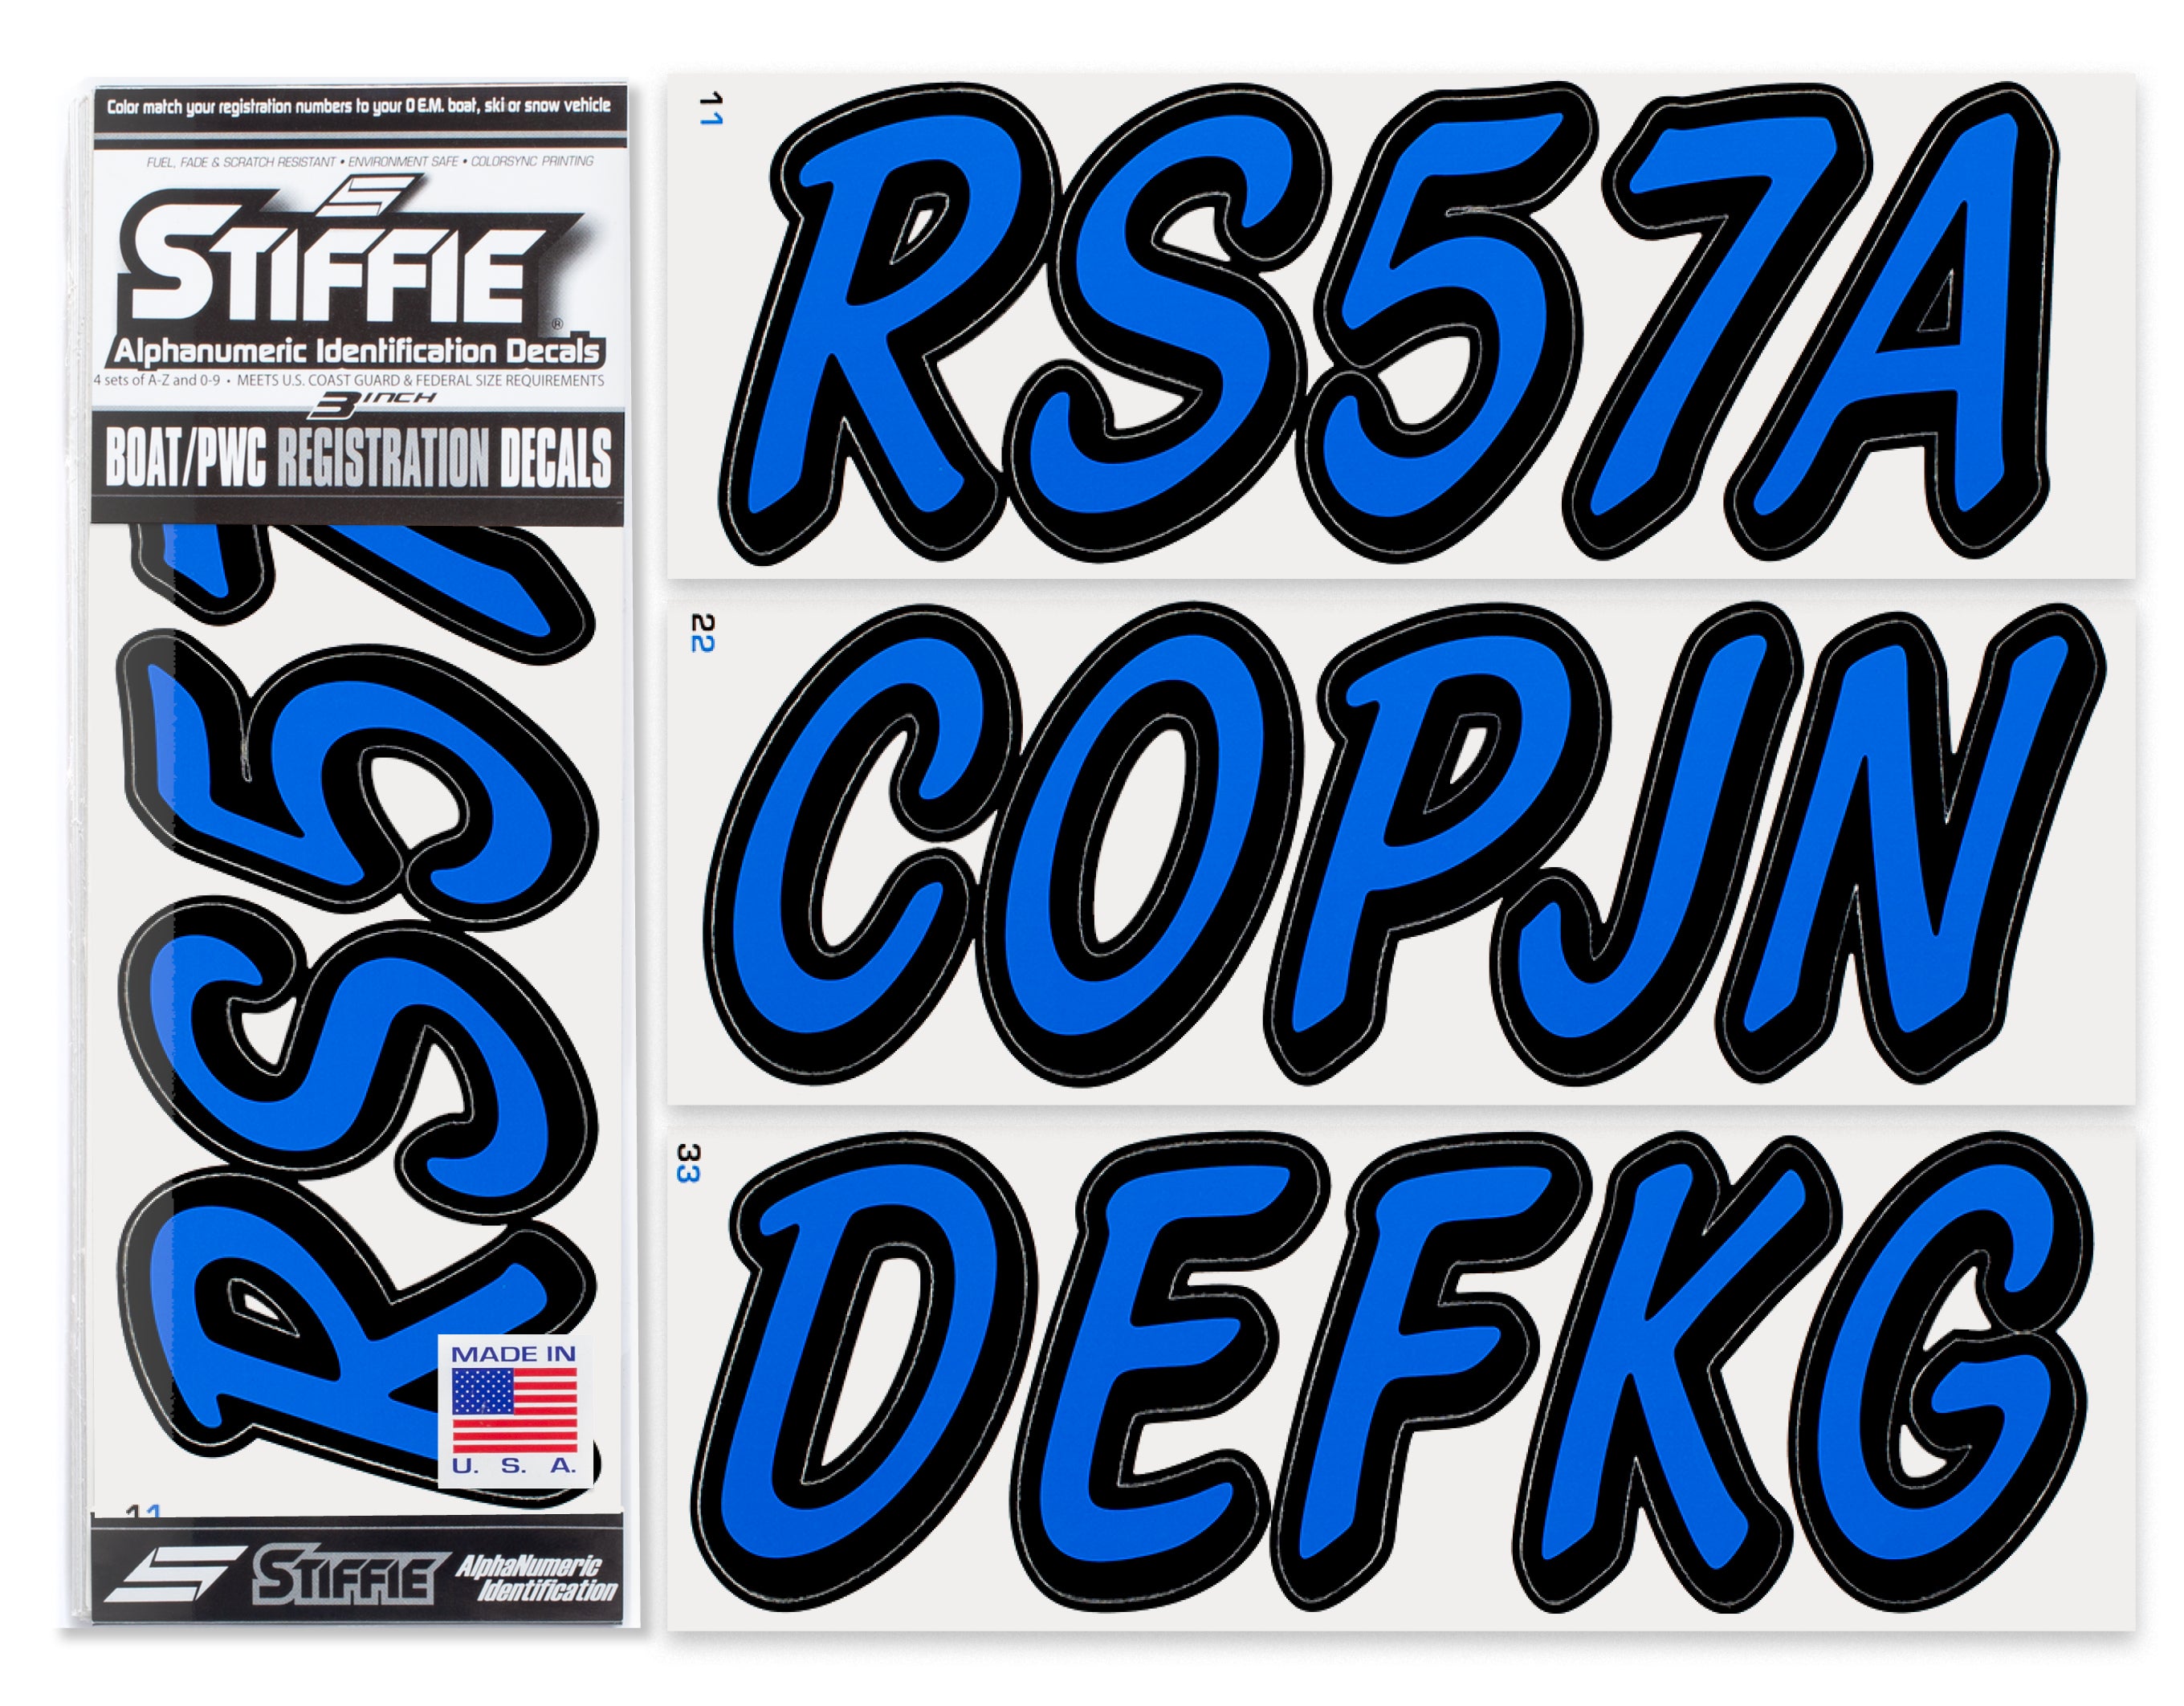 STIFFIE Whipline Solid Octane Blue/Black 3" Alpha-Numeric Registration Identification Numbers Stickers Decals for Boats & Personal Watercraft